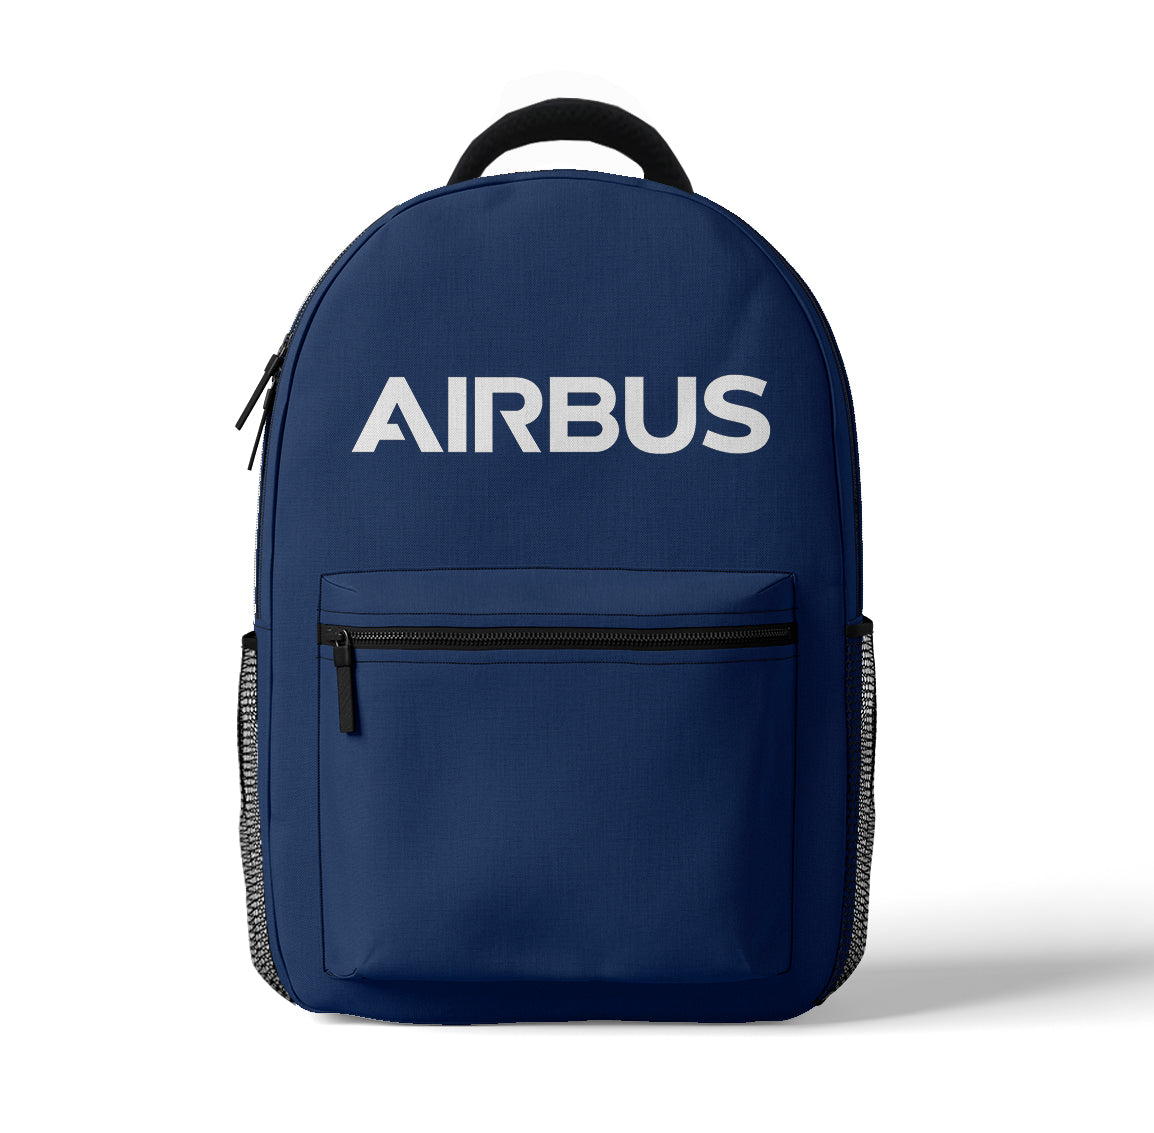 Airbus & Text Designed 3D Backpacks